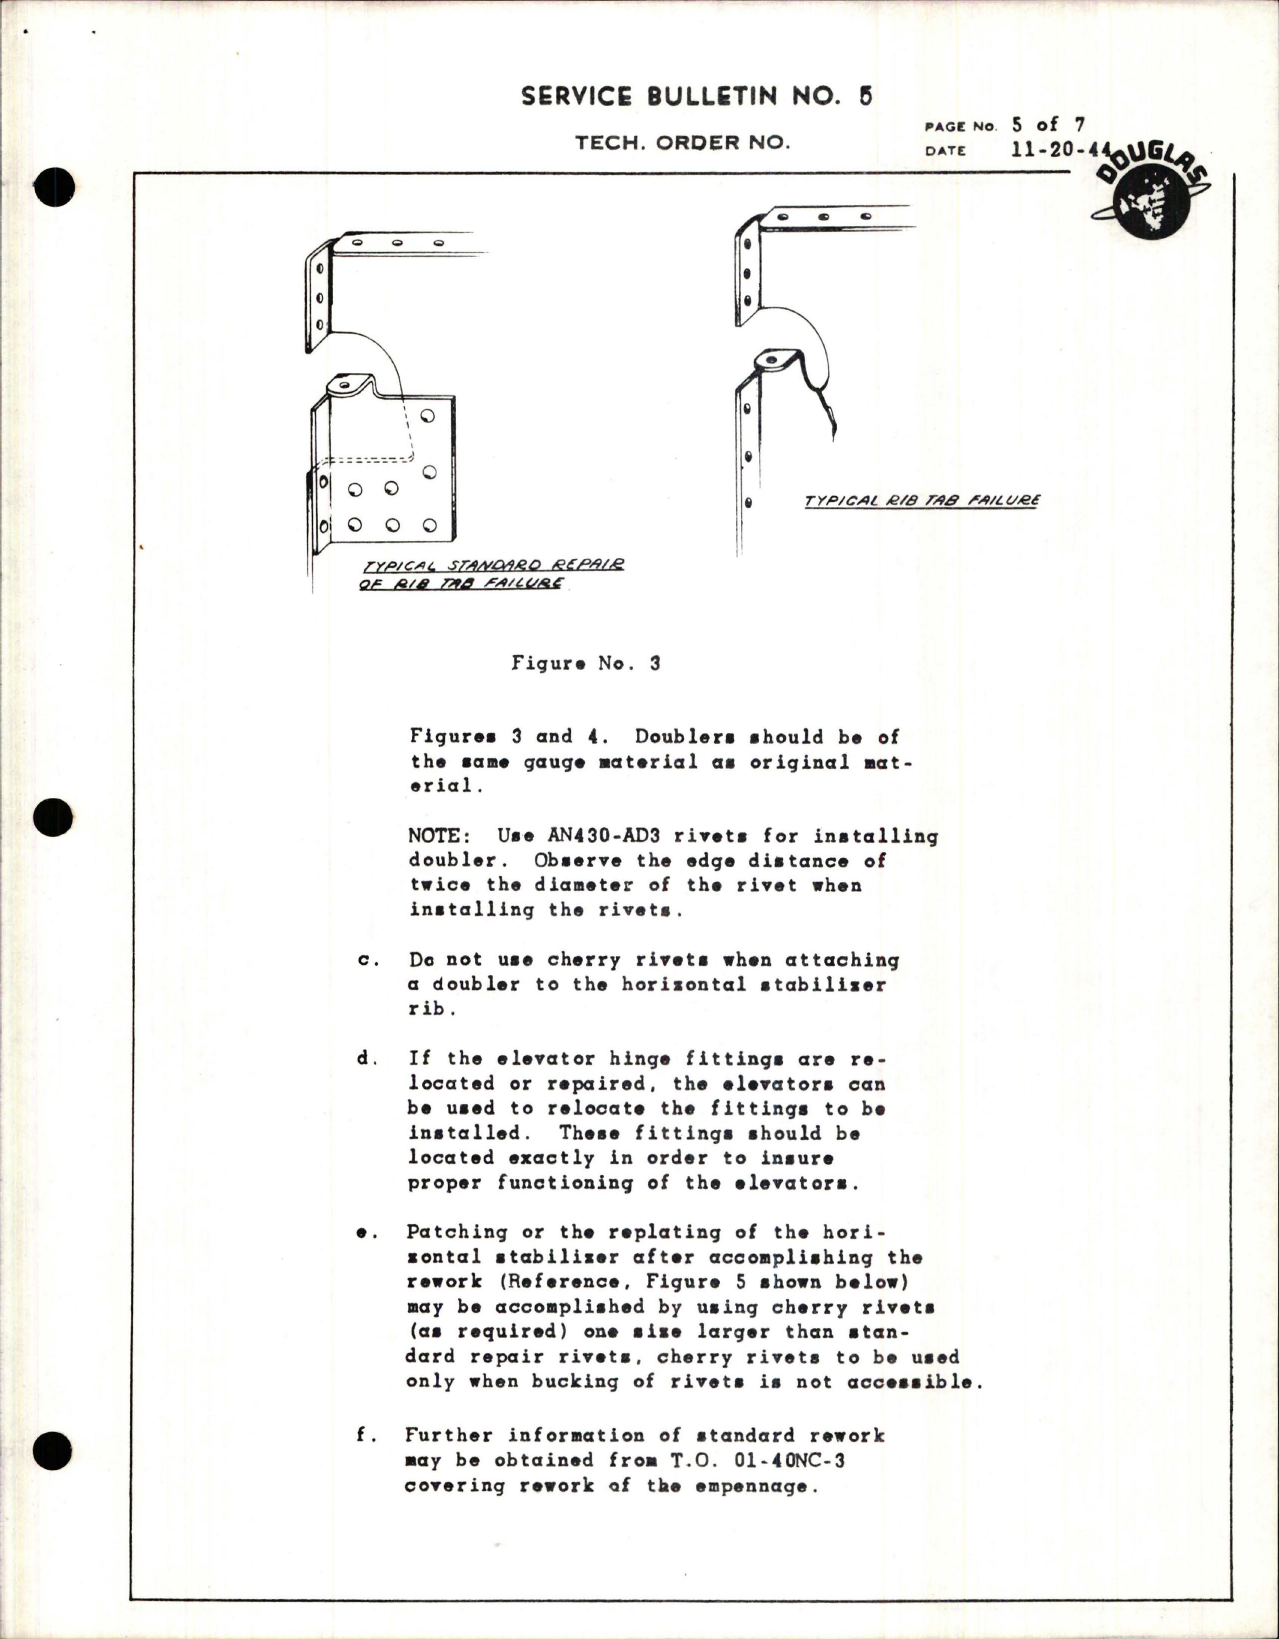 Sample page 5 from AirCorps Library document: Reinforcement and Repair of the Horizontal Stabilizer Rib Structure - Rework and Repair to be Accomplished only at the of Horizontal Rib Failures